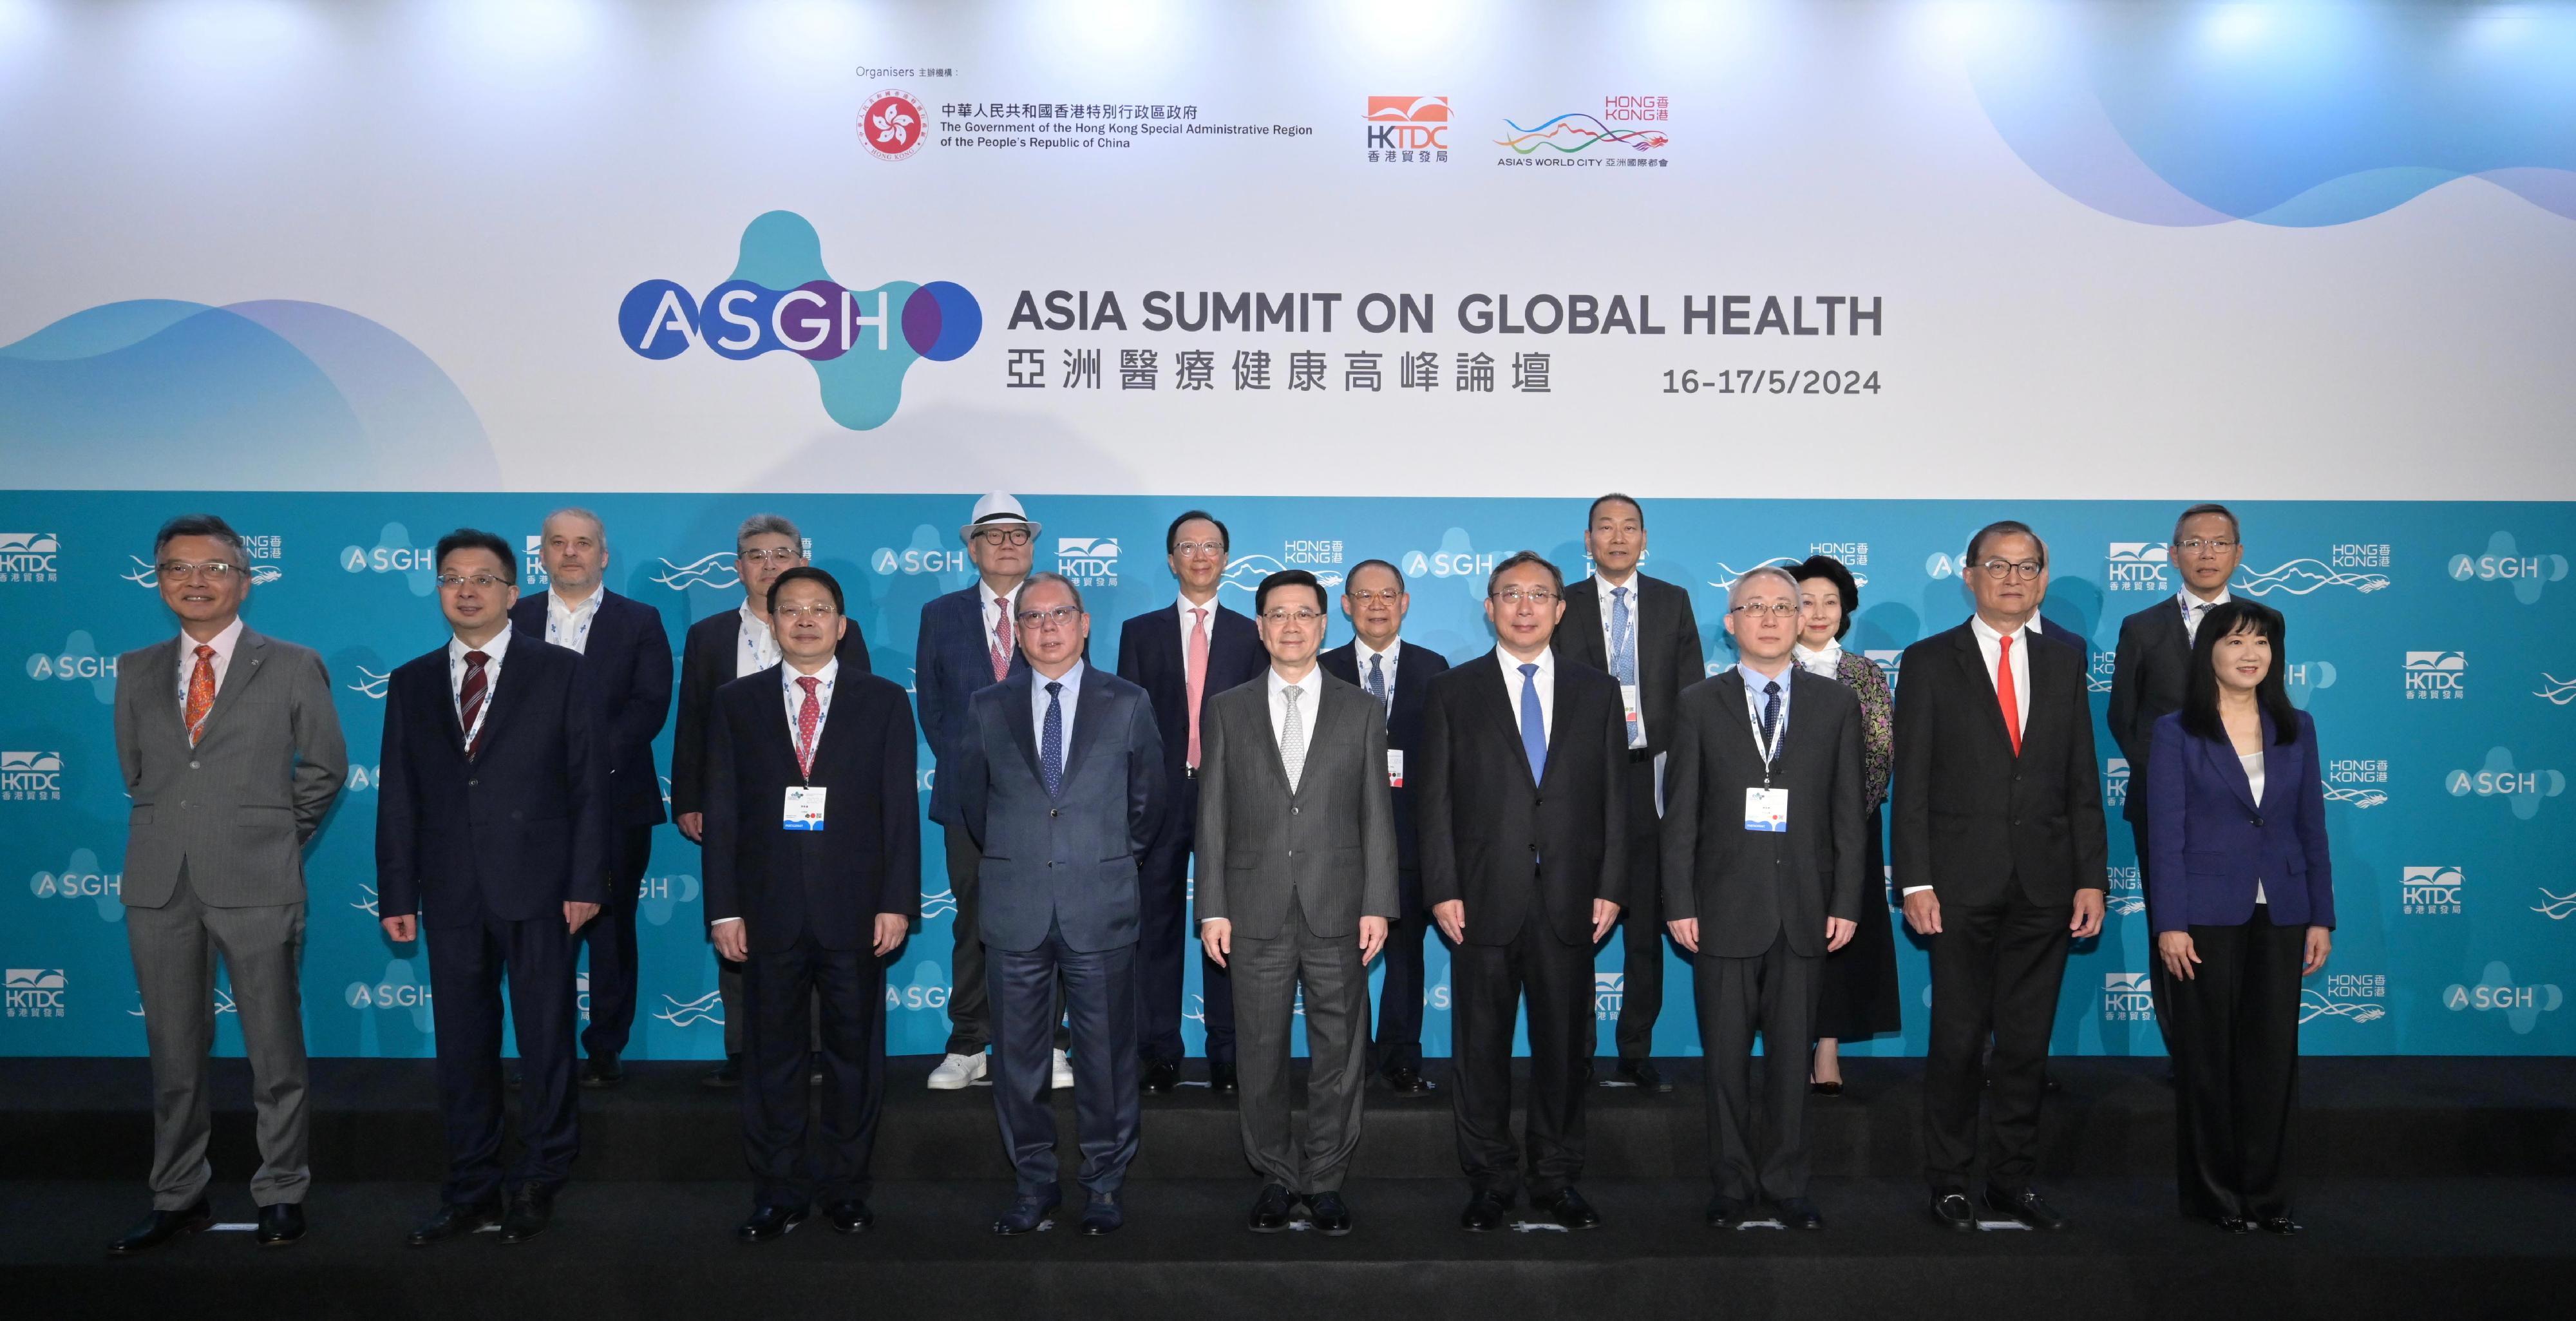 The Chief Executive, Mr John Lee, attended the Asia Summit on Global Health today (May 16). Photo shows (front row, from left) Non-official Member of the Executive Council Dr Lam Ching-choi; the Head of the Consumer Products Industry Department at the Ministry of Industry and Information Technology, Mr He Yaqiong; Deputy Director of the Liaison Office of the Central People's Government in the Hong Kong Special Administrative Region (HKSAR) Mr Yin Zonghua; the Chairman of the Hong Kong Trade Development Council (HKTDC), Dr Peter Lam; Mr Lee; Vice-minister of the National Health Commission Mr Cao Xuetao; Deputy Commissioner of the Office of the Commissioner of the Ministry of Foreign Affairs of the People's Republic of China in the HKSAR Mr Li Yongsheng; the Secretary for Health, Professor Lo Chung-mau; the Executive Director of the HKTDC, Ms Margaret Fong, and other guests at the event.
